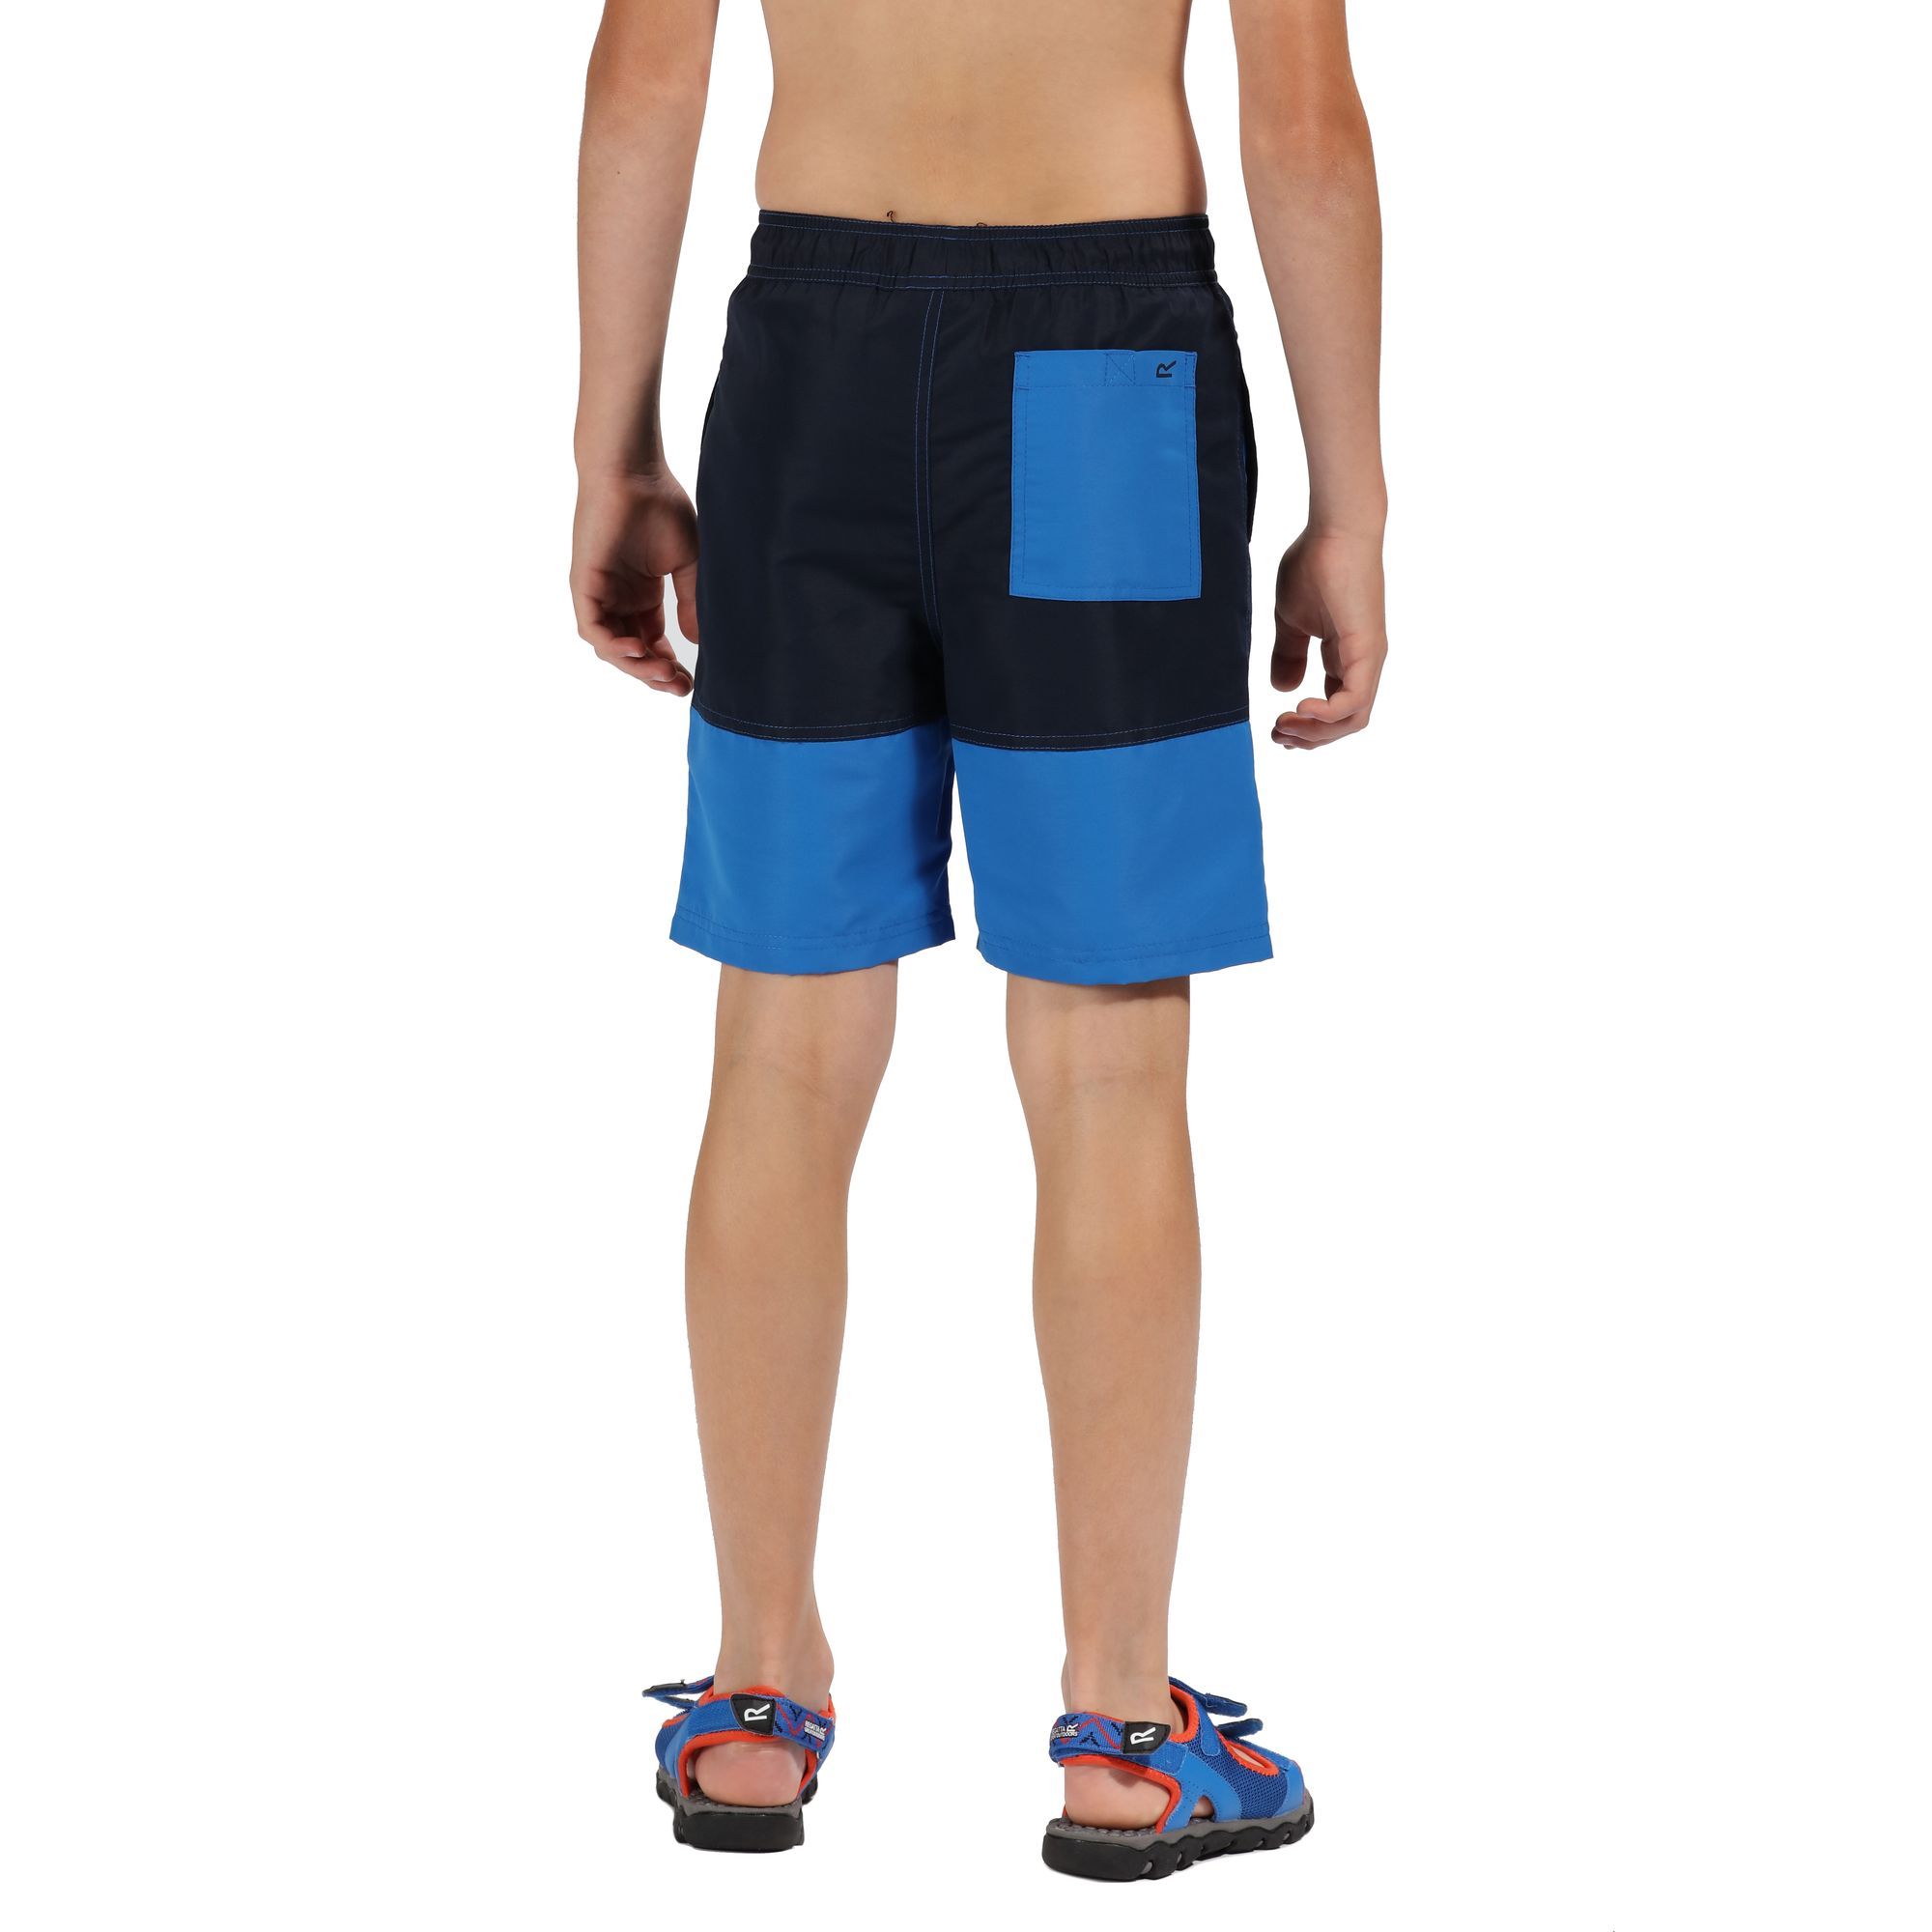 Material: 100% polyester taslan fabric. Quick drying fabric. Long-length board shorts. With a drawcord waist, an airy mesh brief liner and pockets to the side and back. Size (height/waist): (2 Years) 92cm/52-53cm, (3-4 Years) 98-104cm/53-54cm, (5-6 Years) 110-116cm/55-57cm, (7-8 Years) 122-128cm/58-60cm, (9-10 Years) 135-140cm/61-64cm, (11-12 Years) 146-152cm/65-66cm, (13 Years) 153-158cm/69cm, (14 Years) 164-170cm/73cm, (15-16 Years) 170-176cm/76-79cm.